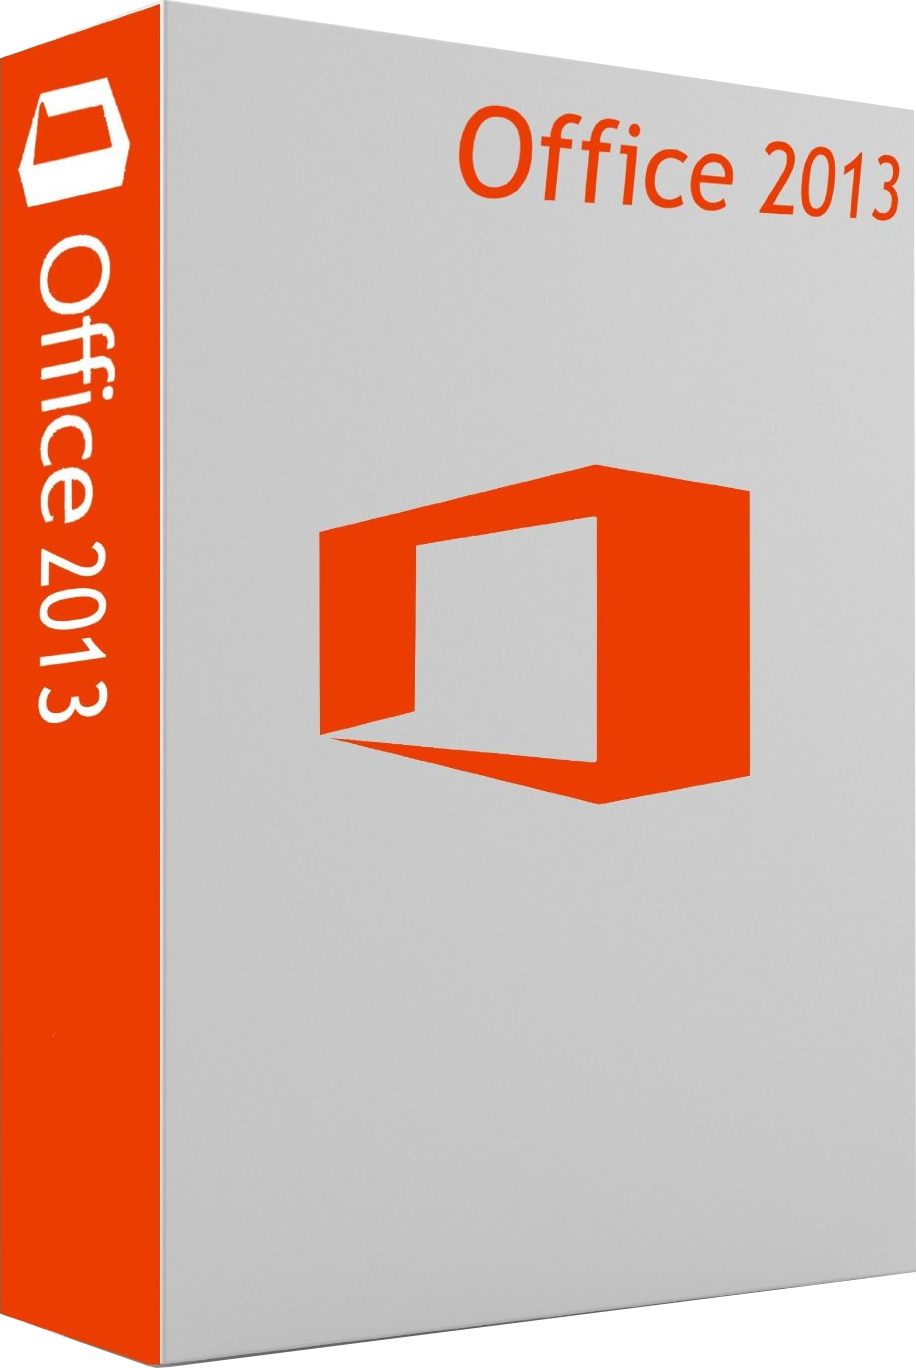 Microsoft office 2013 Activator Plus Crack Key is Here